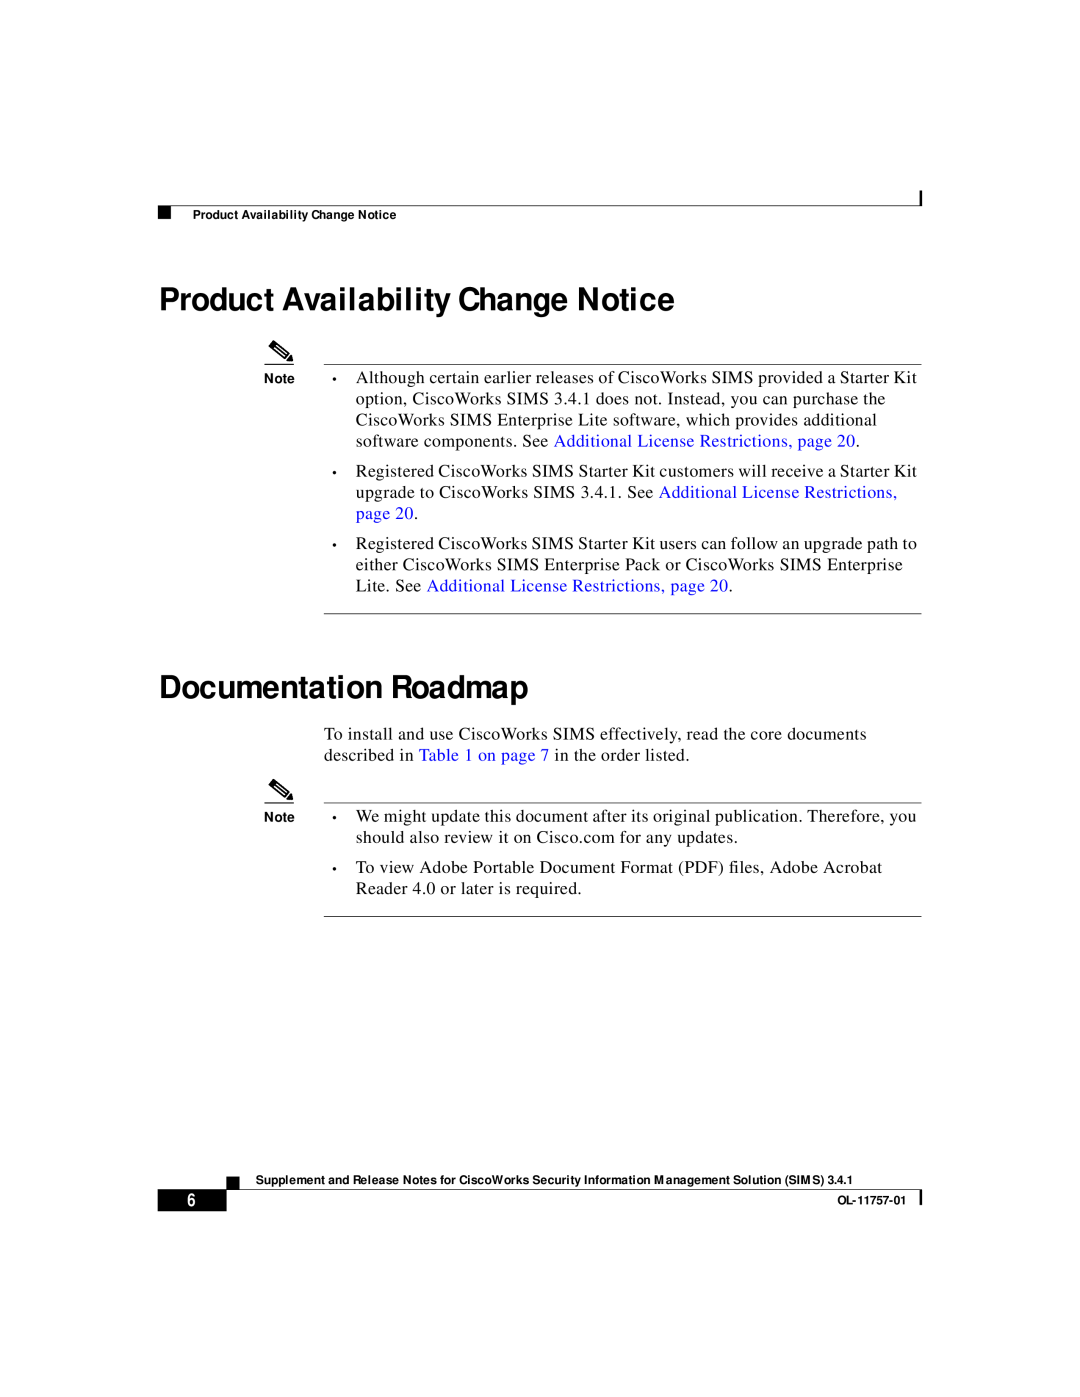 Cisco Systems OL-11757-01 manual Product Availability Change Notice, Documentation Roadmap, page 